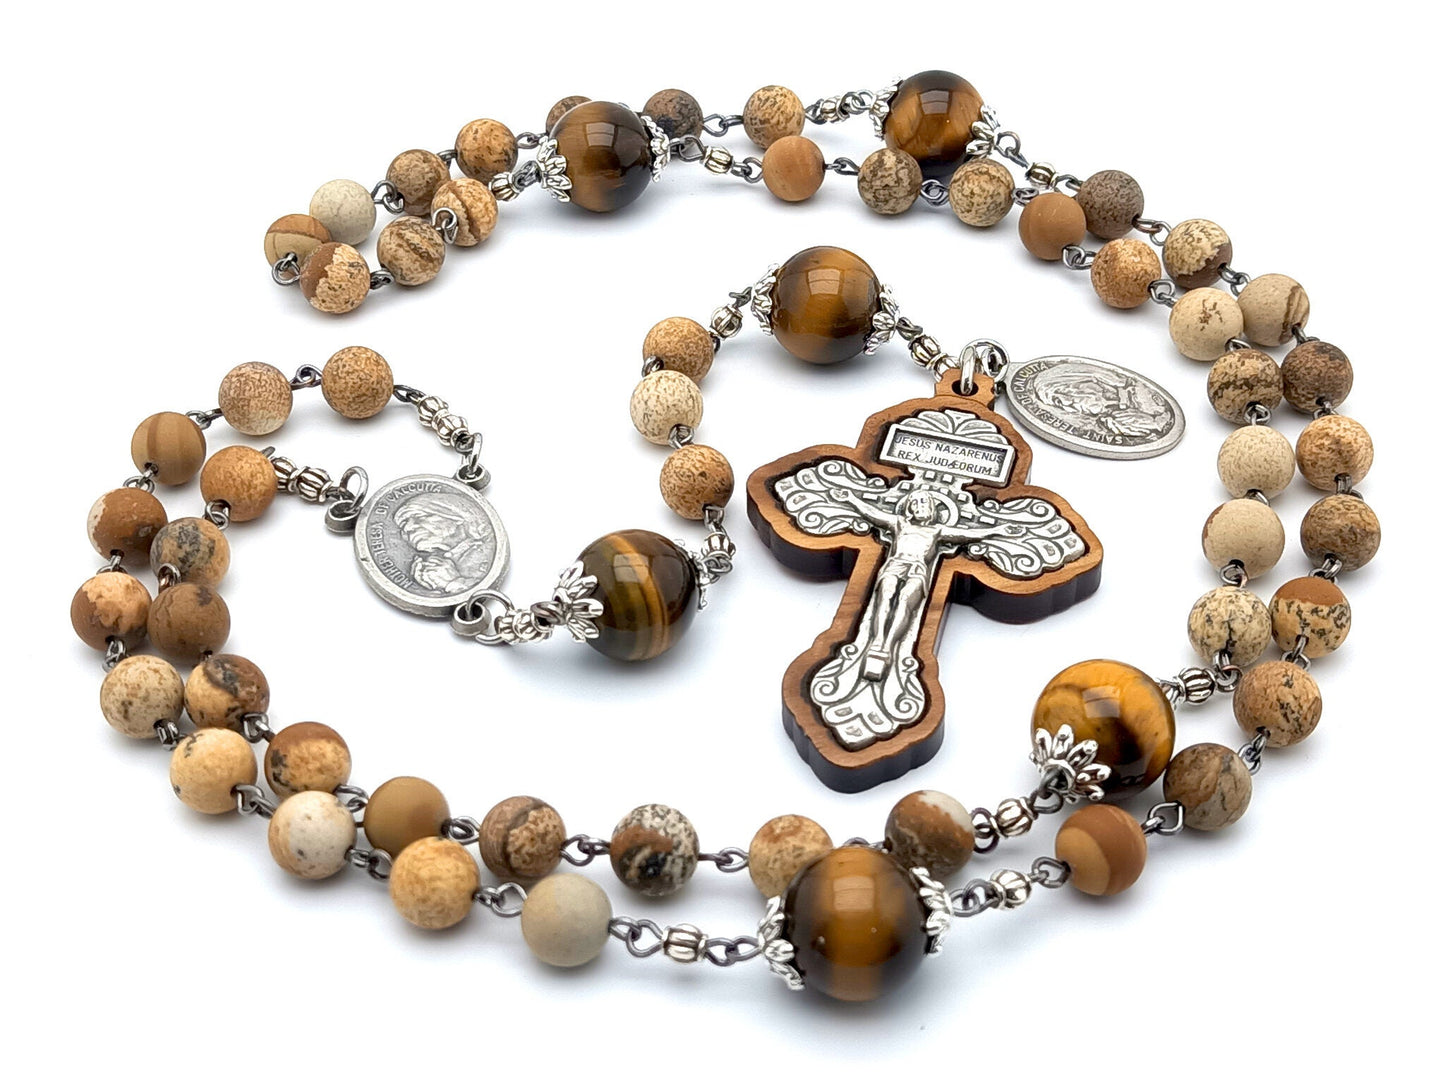 Saint Teresa of Calcutta unique rosary beads with natural and tigers eye gemstone beads, Pardon crucifix embedded in wood and metal centre medal.